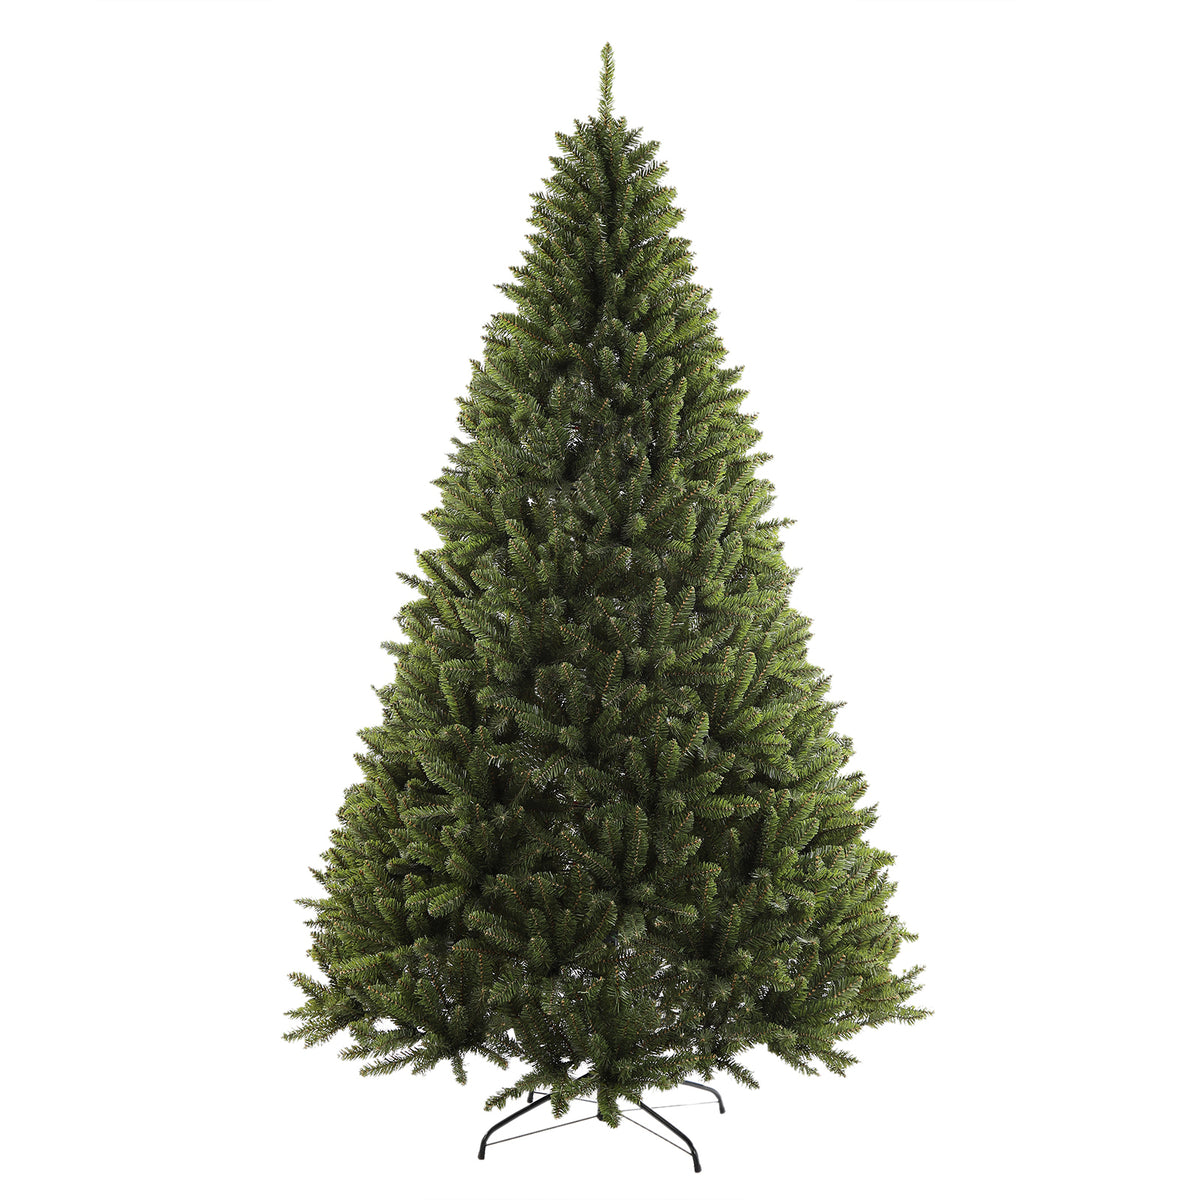 6ft Christmas Tree Artificial Full Xmas Trees,Green, for Holiday,Home,Office,Party Decoration, 960 Branch Tips Metal Hinges & Foldable Base